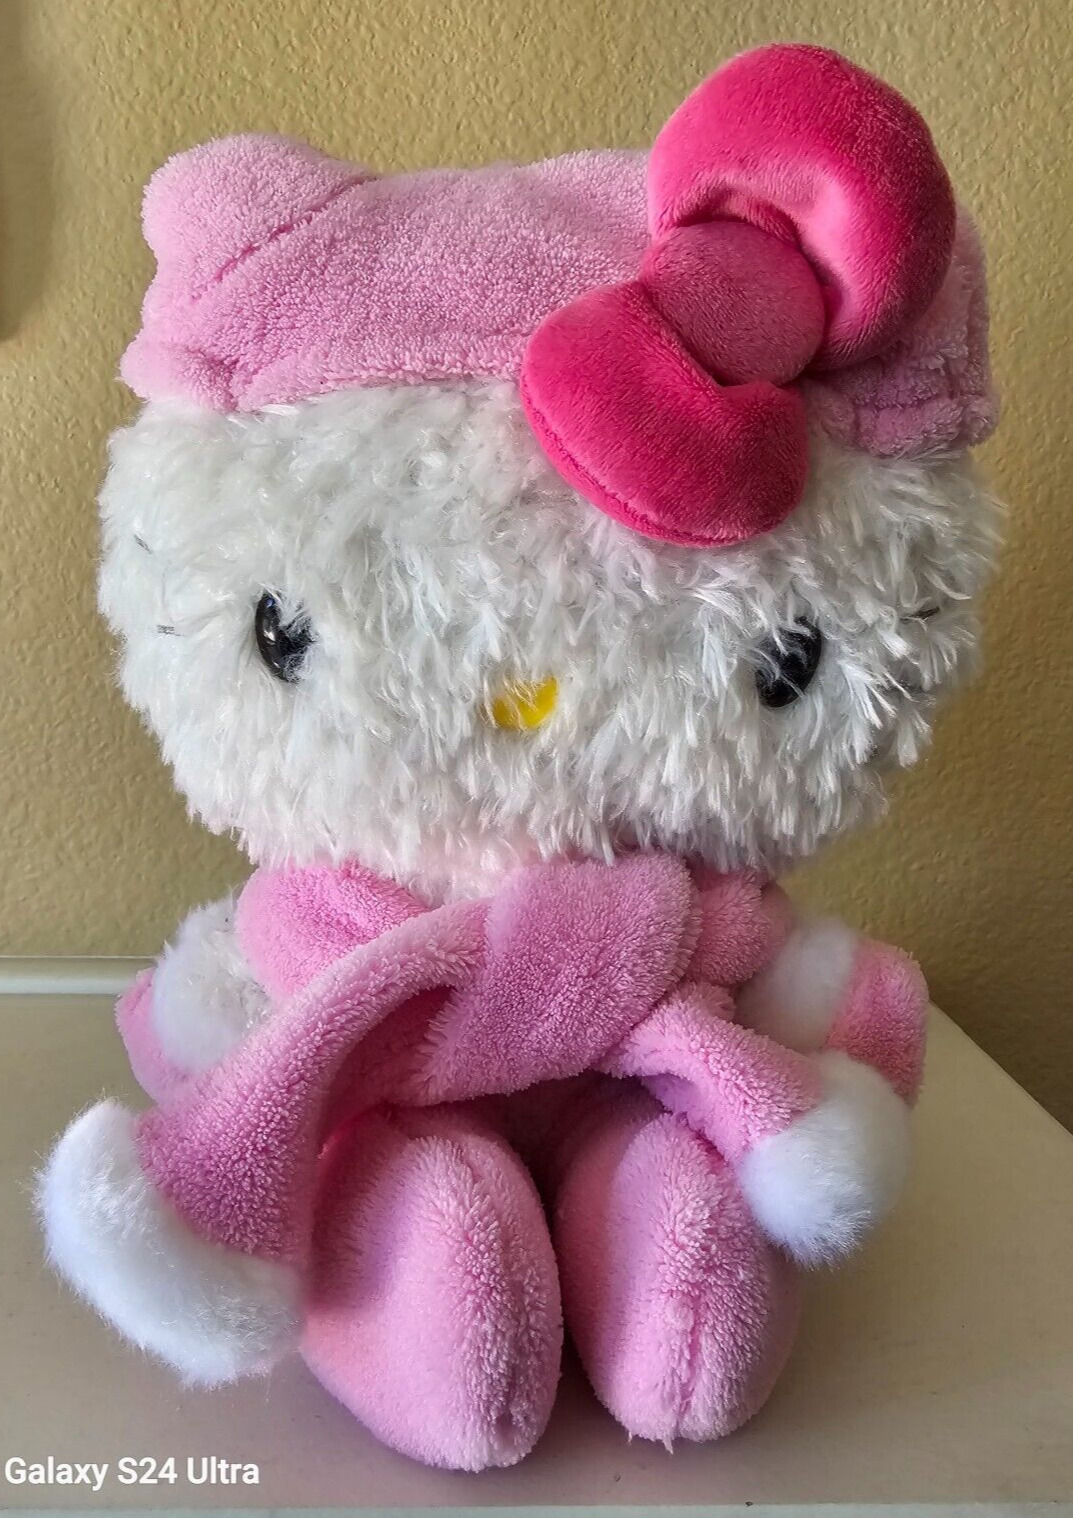 NEW RARE Sanrio Hello Kitty 2009 Plush with Removable Hat-Socks & Scarf NWT